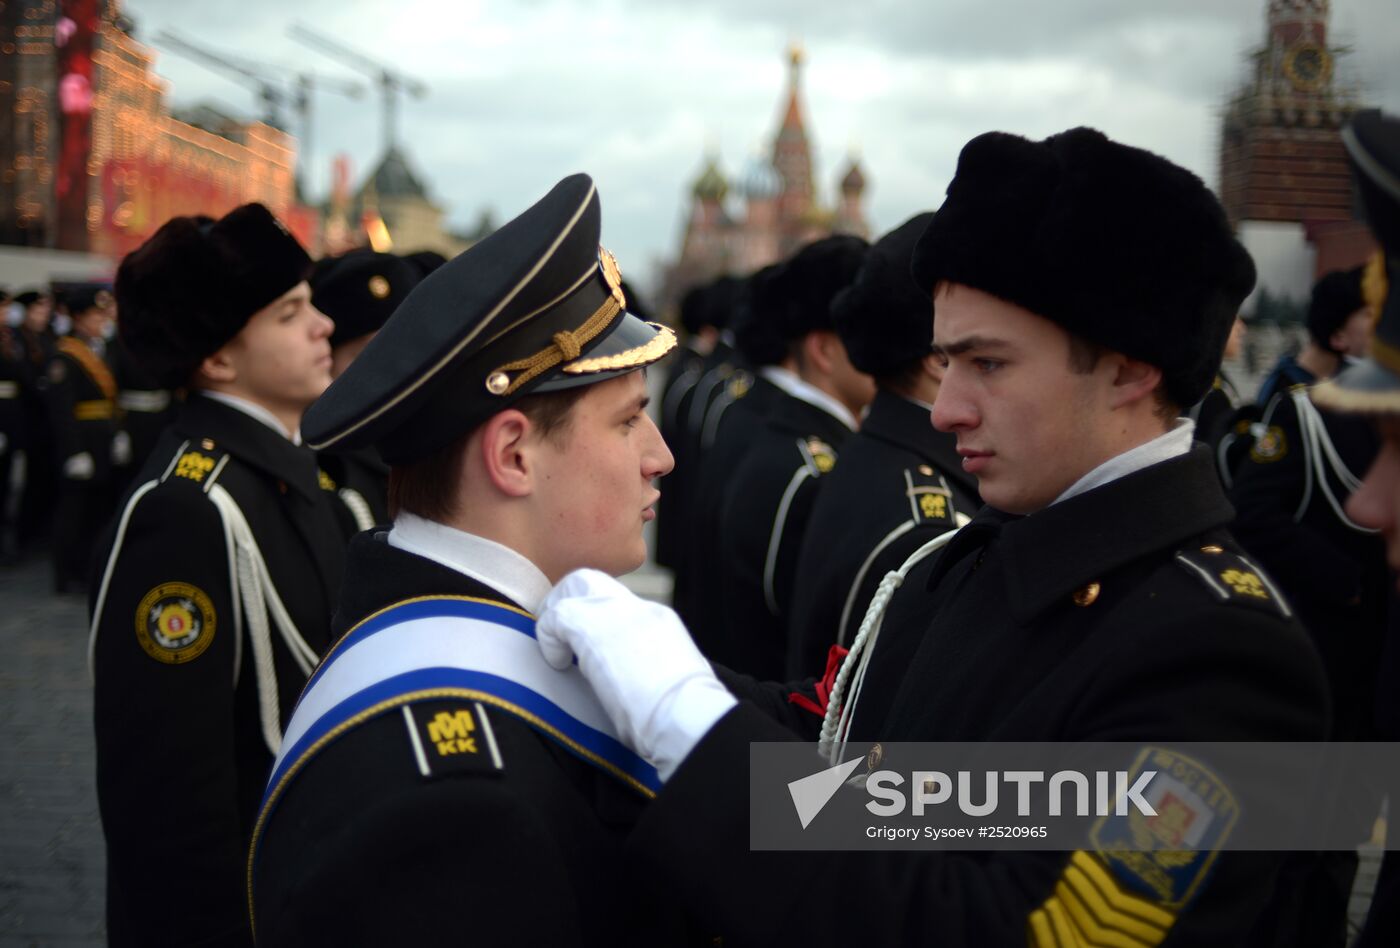 Rehearsal of march to mark the 1941 legendary military parade